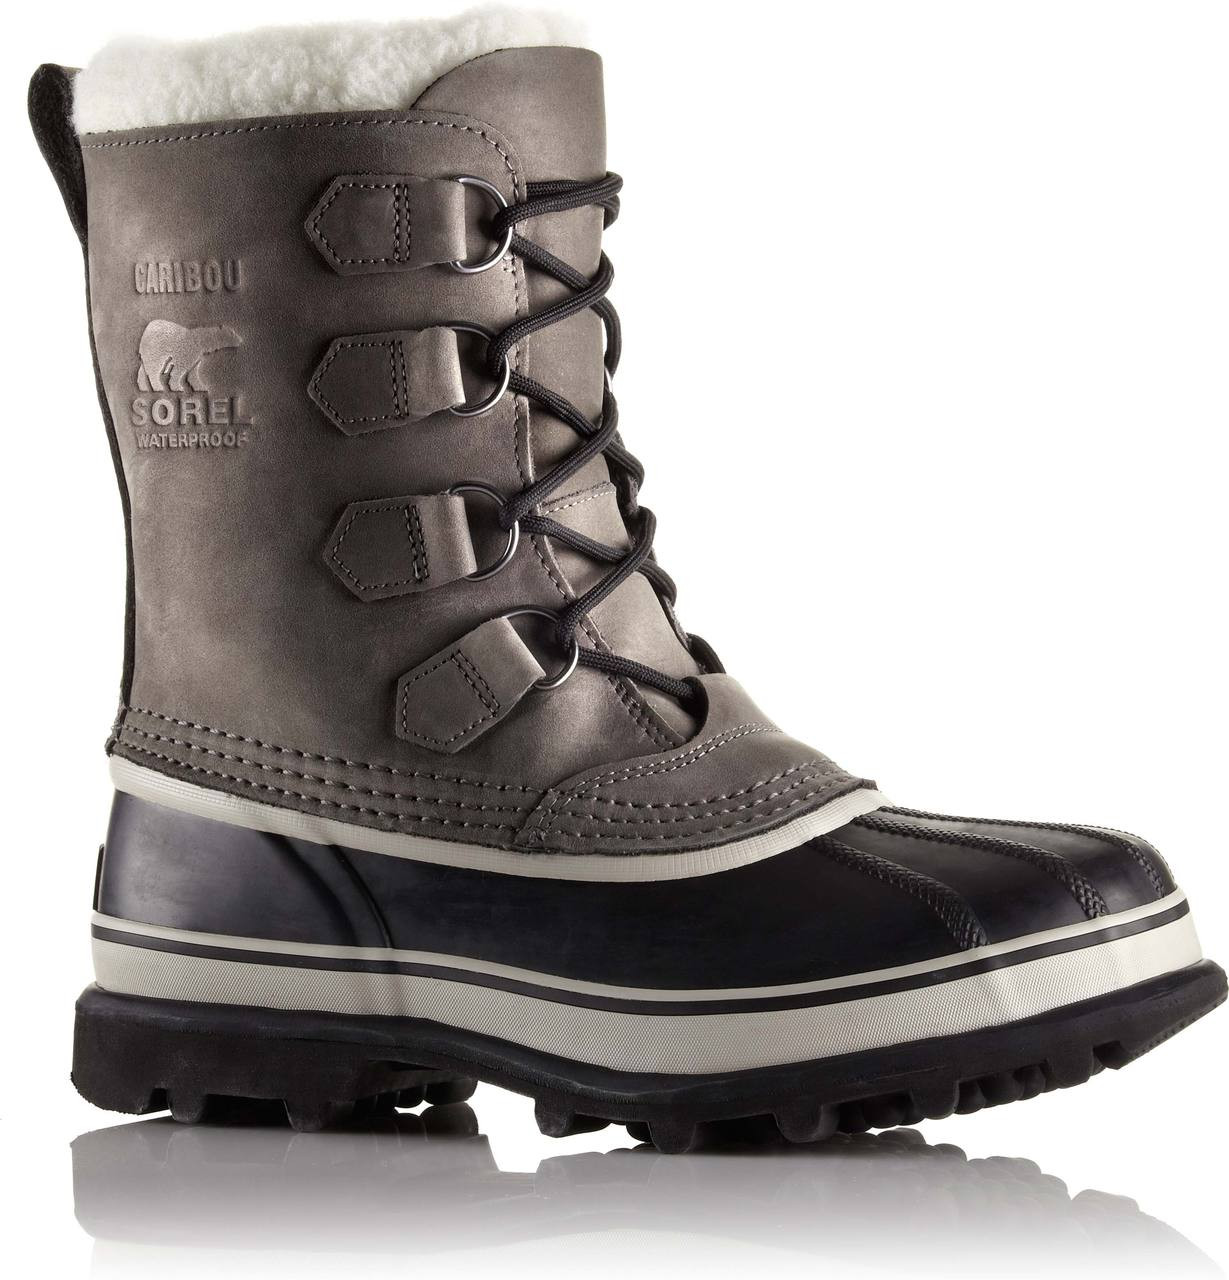 Sorel Women's - FREE & FREE Returns - Ankle Casual Boots, Winter Boots, Mid-Calf Boots